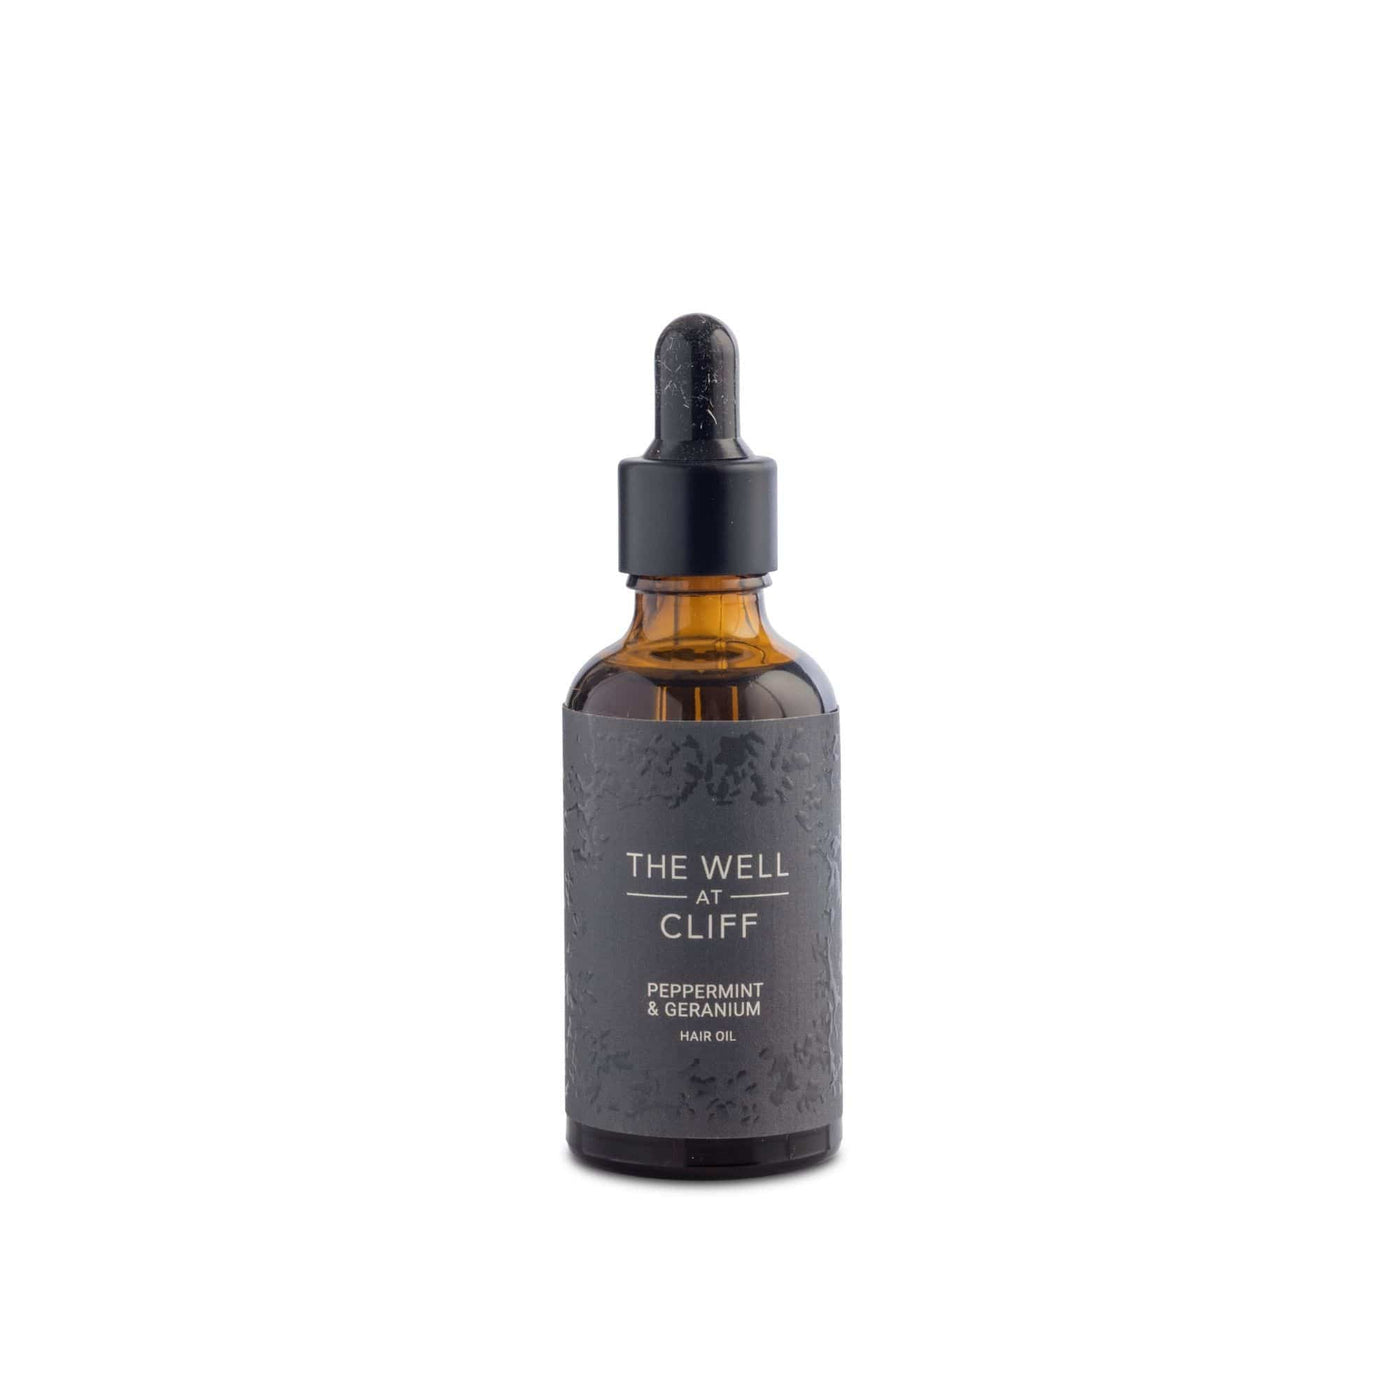 The Well at Cliff Beauty Nourishing Hair Oil